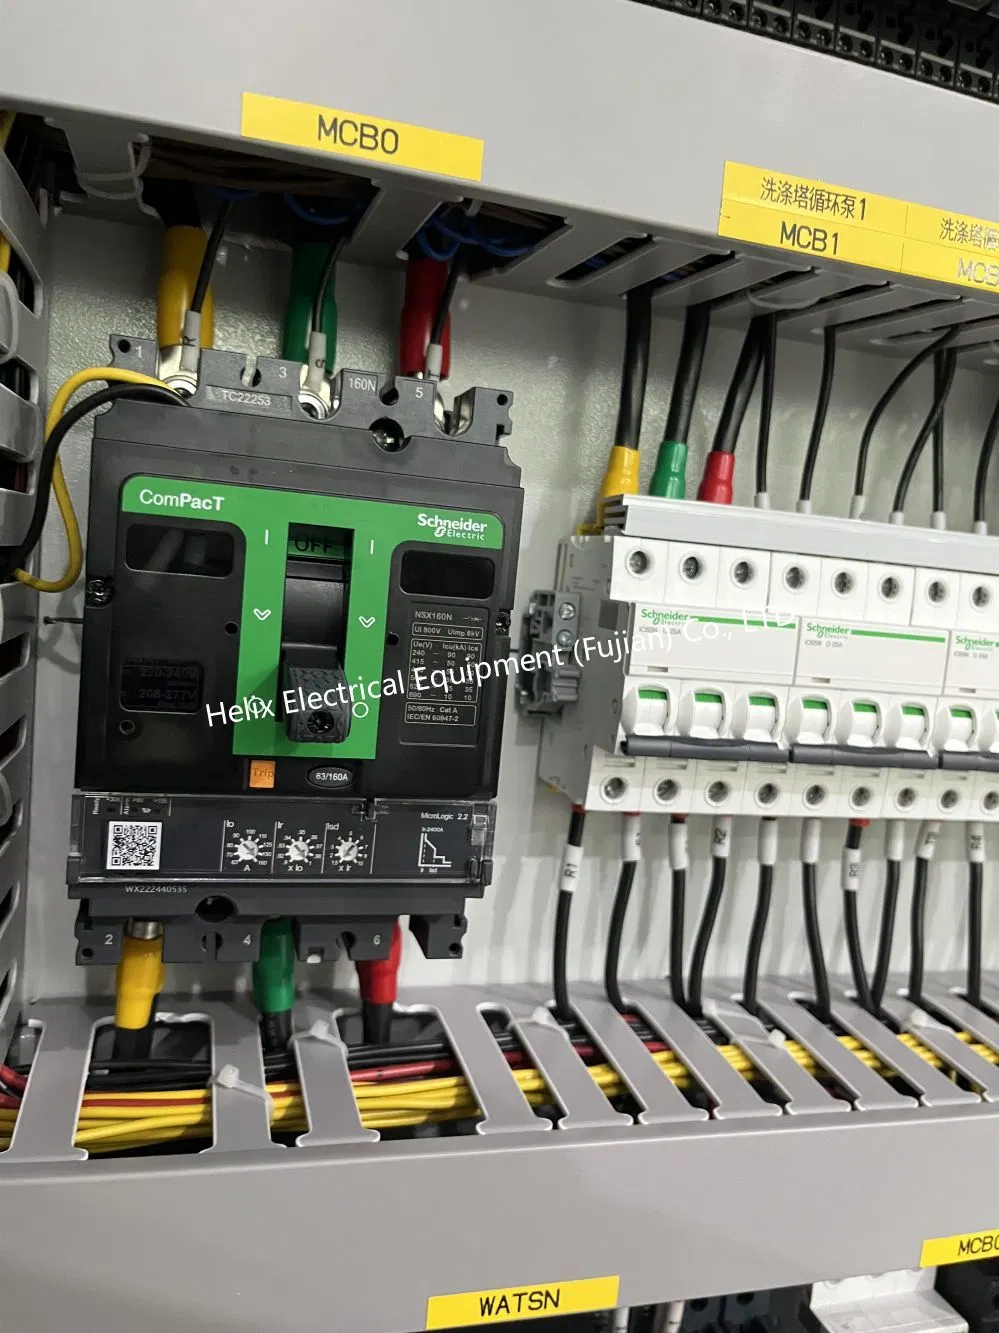 G2 for Fmcs Central Monitoring System PLC Power Distribution Panel Board